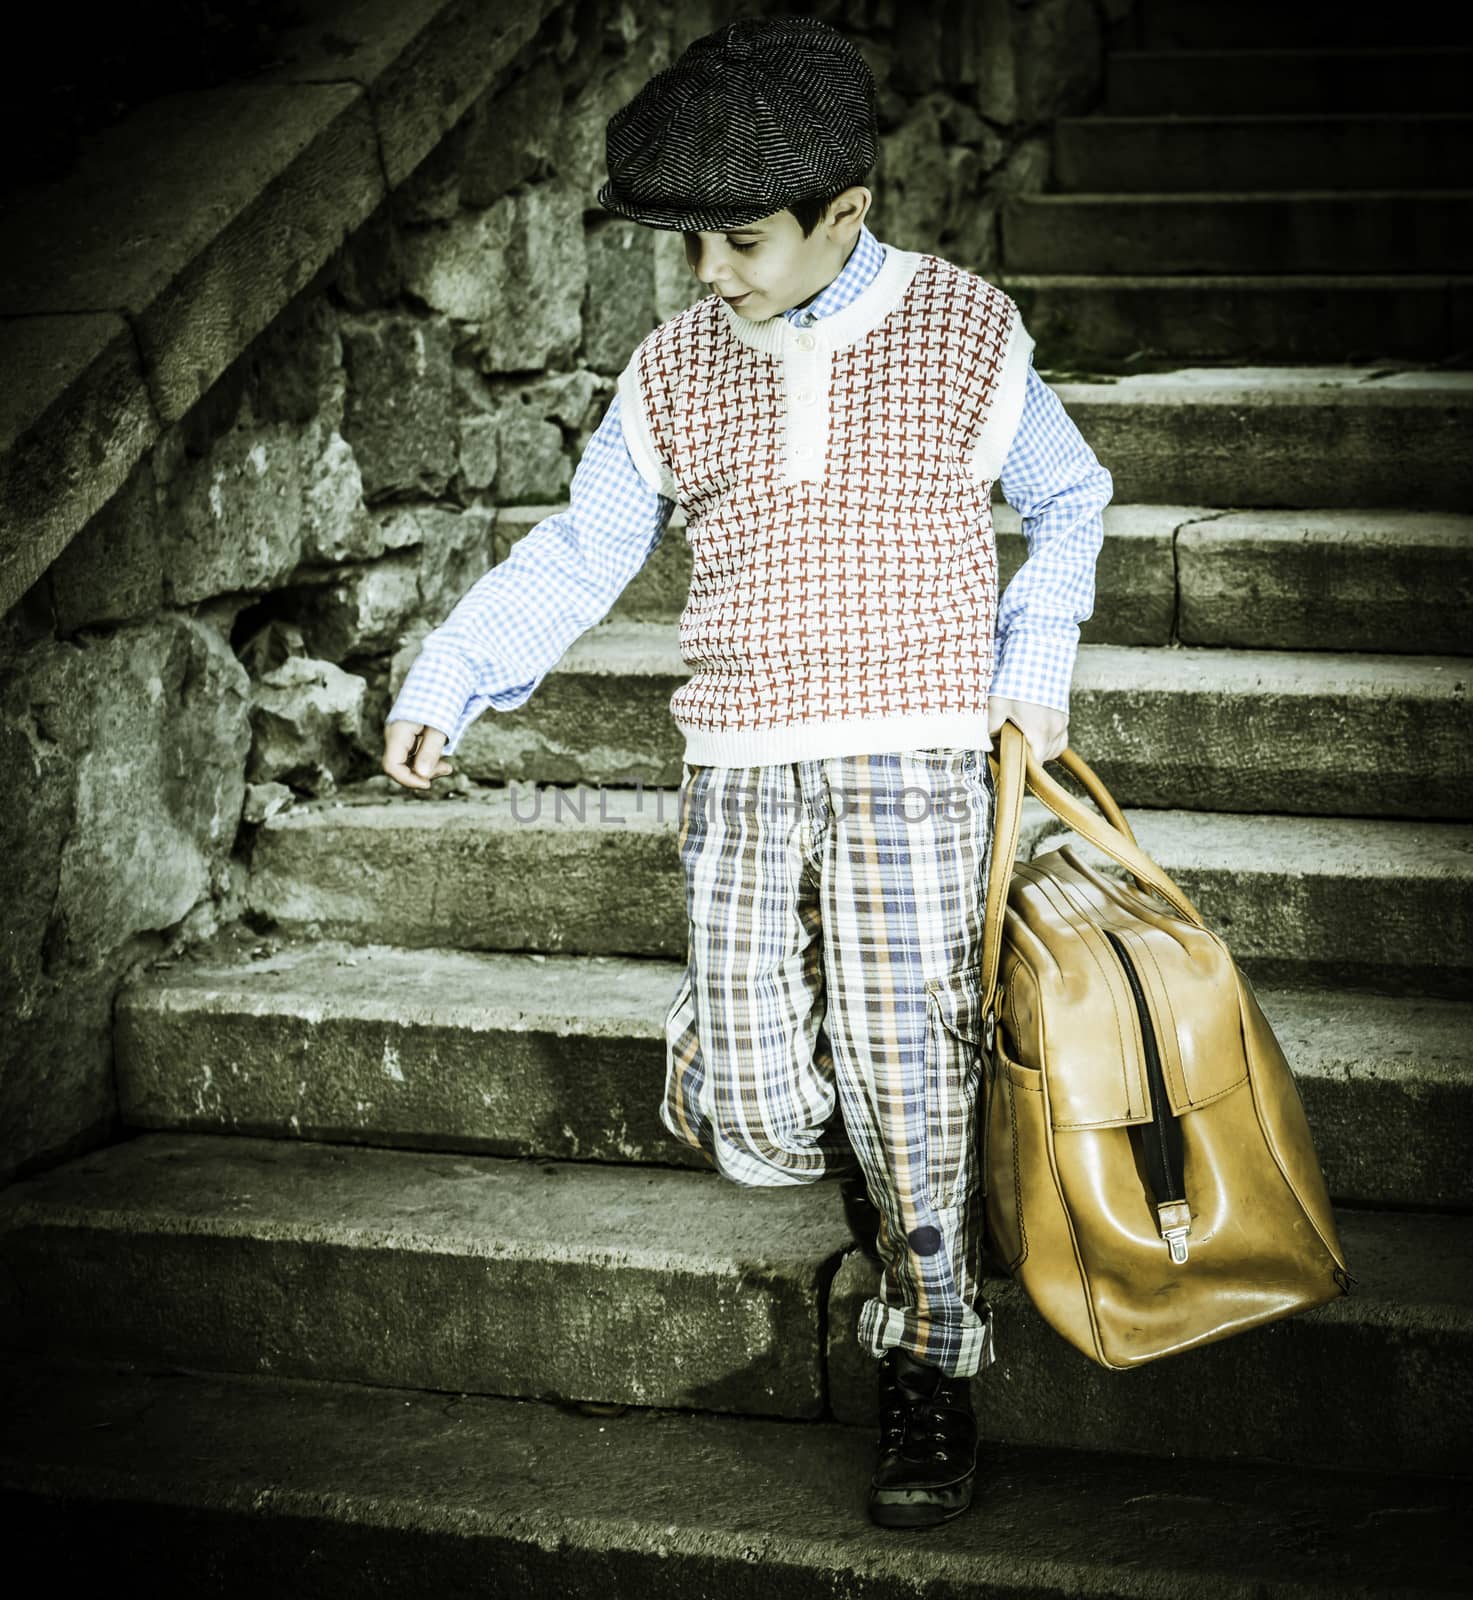 Exterior stairs and child with vintage bag by deyan_georgiev